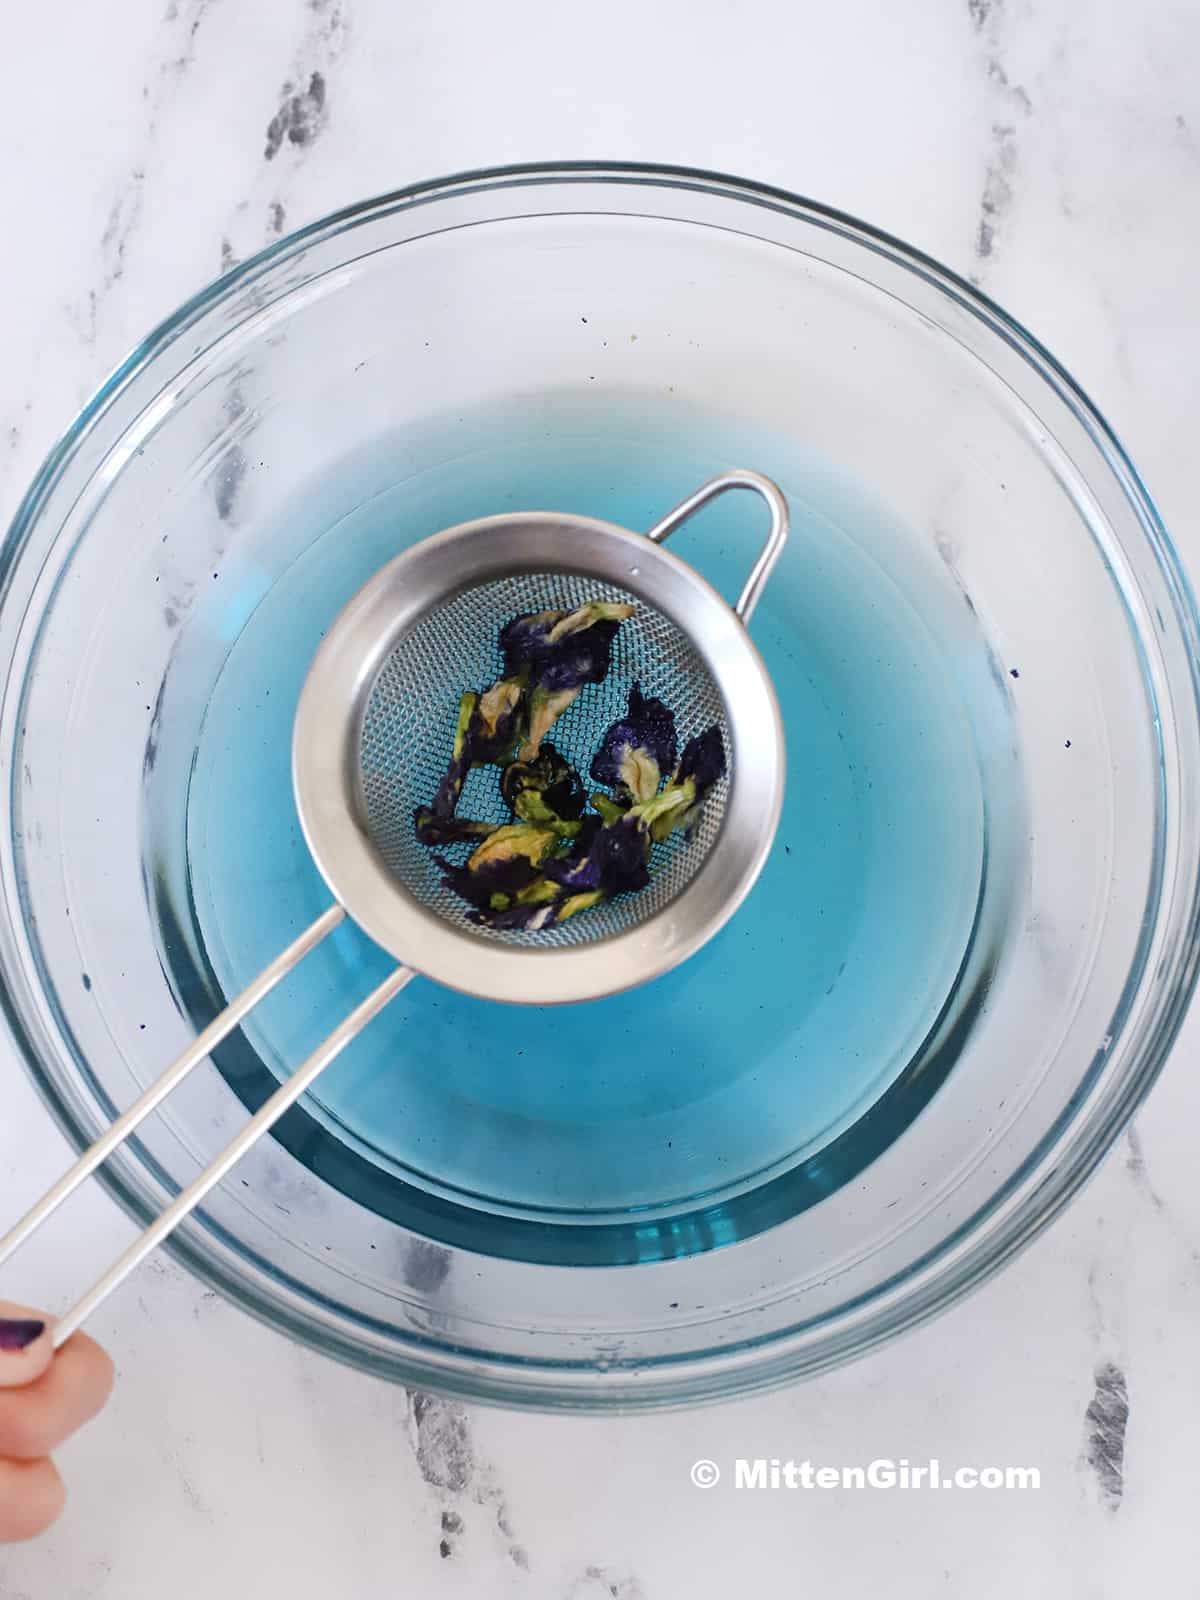 A fine mesh strainer holding the butterfly pea flowers over the finished syrup.